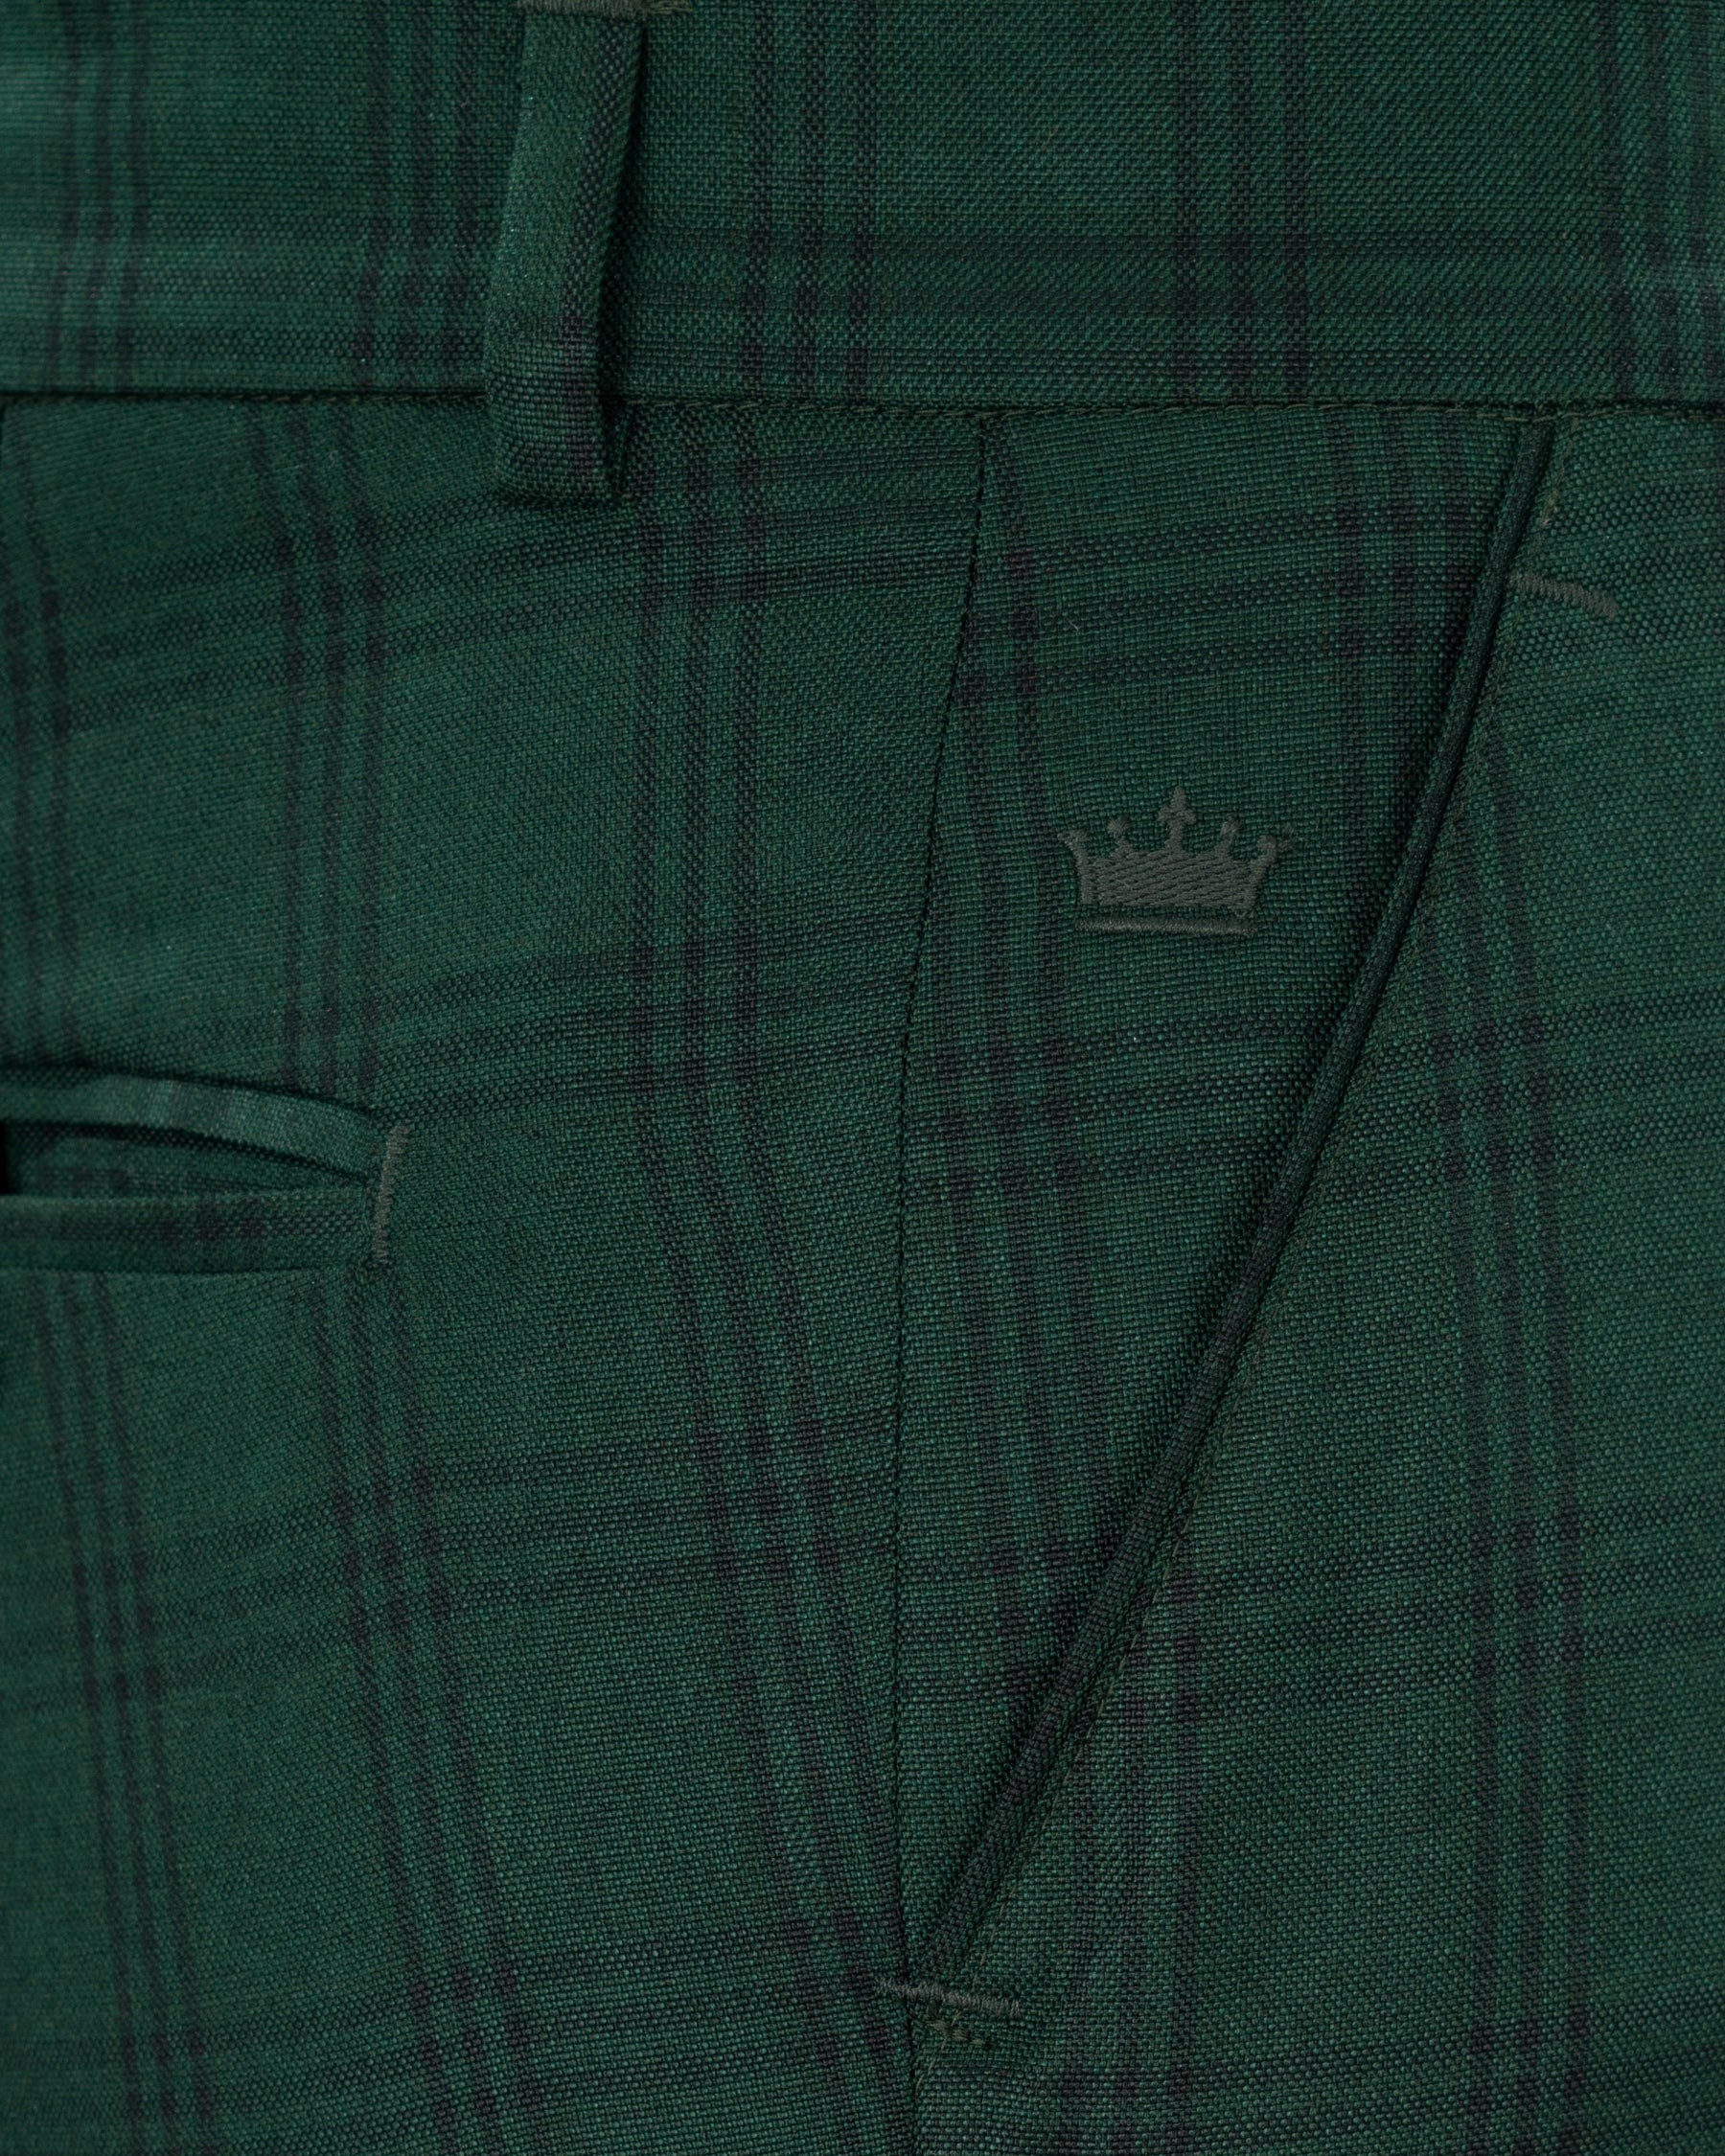 Phthalo Green Windowpane Double Breasted Suit ST1722-DB-36, ST1722-DB-38, ST1722-DB-40, ST1722-DB-42, ST1722-DB-44, ST1722-DB-46, ST1722-DB-48, ST1722-DB-50, ST1722-DB-52, ST1722-DB-54, ST1722-DB-56, ST1722-DB-58, ST1722-DB-60